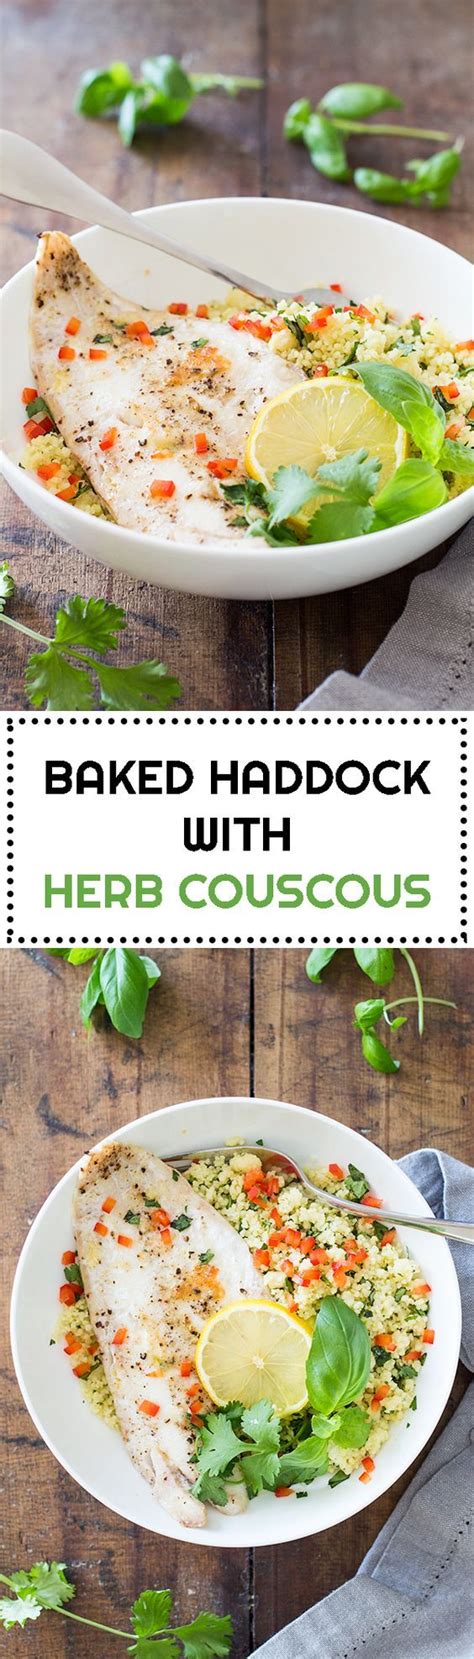 This healthy and easy baked haddock recipe is inspired by the new england version, but made with simple breadcrumbs instead of the traditional crushed ritz crackers. Baked Haddock with Herb Couscous - Green Healthy Cooking ...